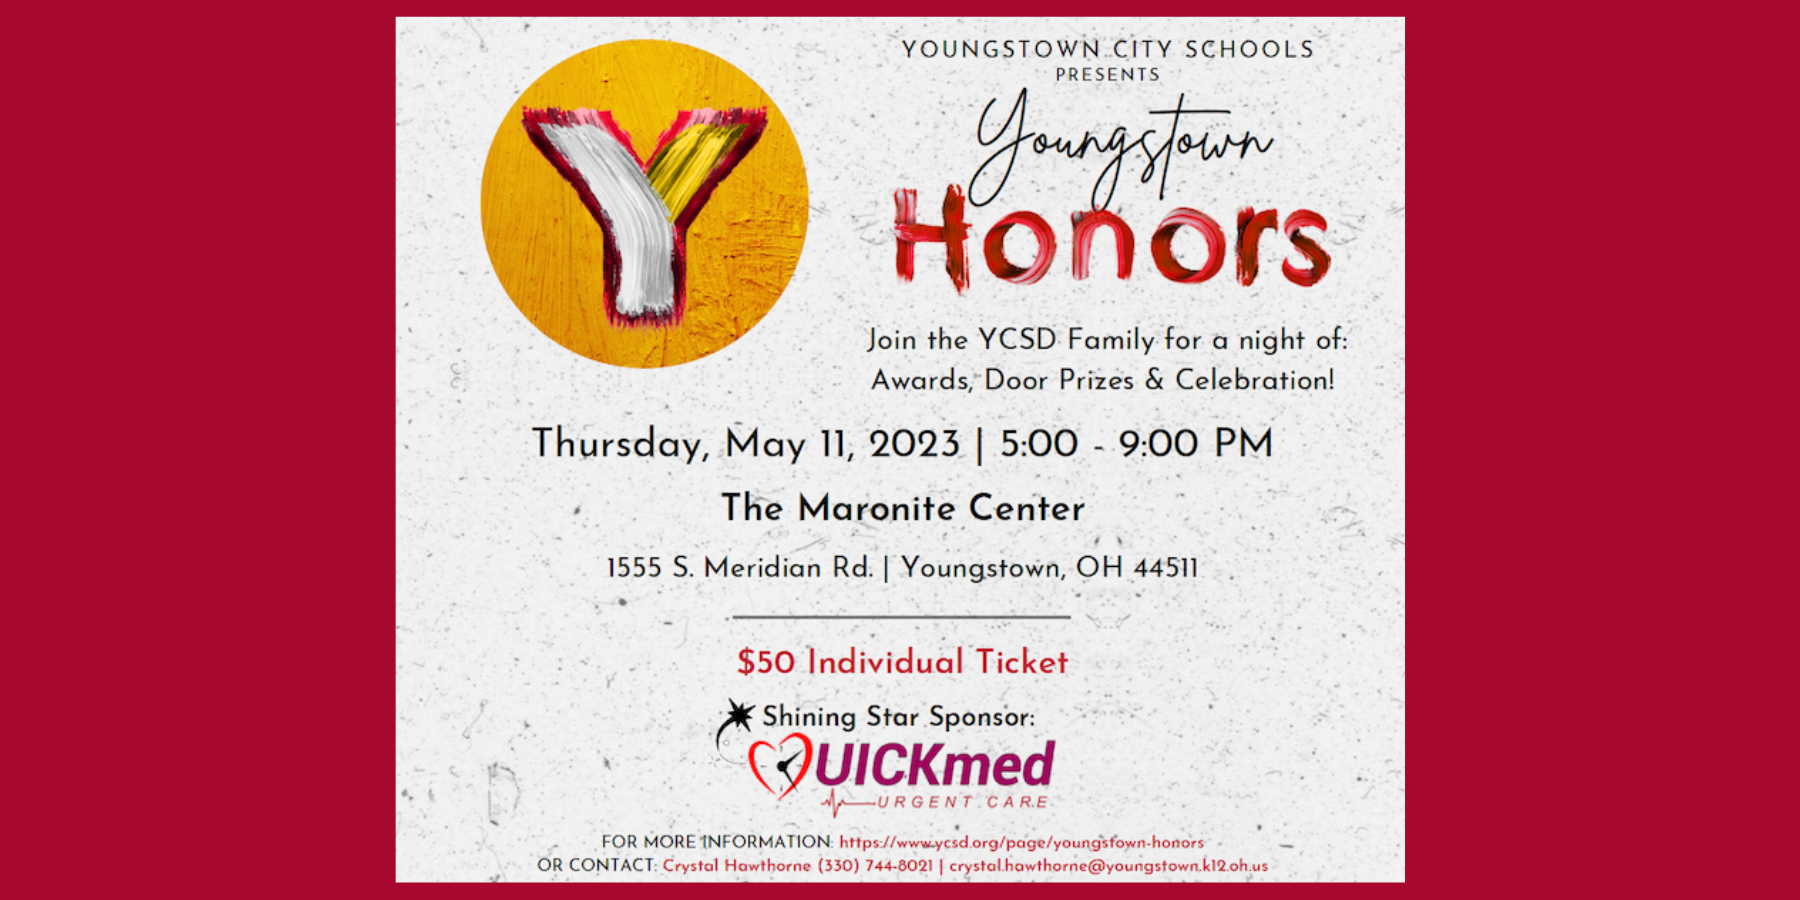 Youngstown honors invitation 